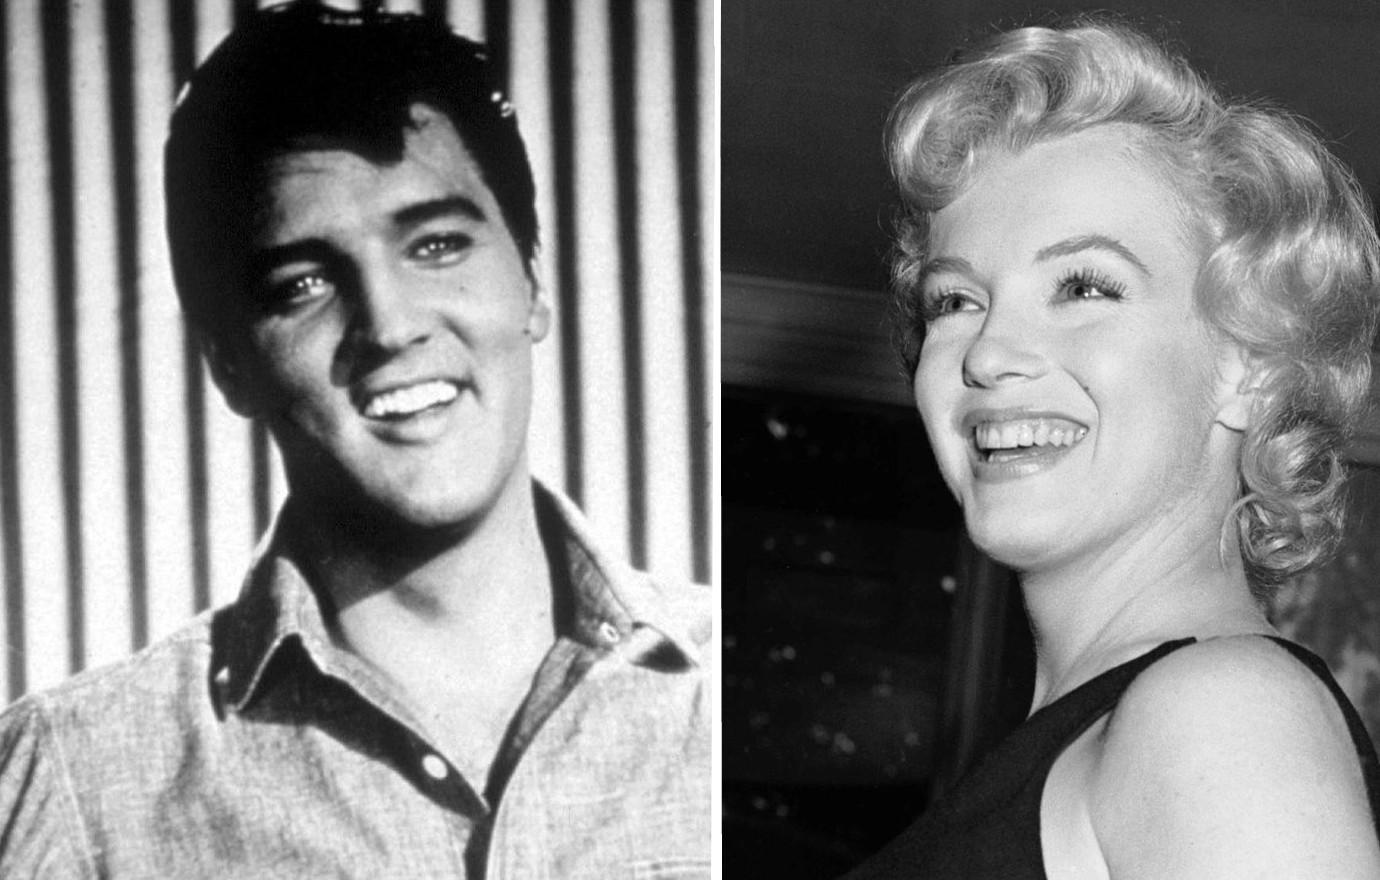 Marilyn Vs the American Gold Digger – The Marilyn Report